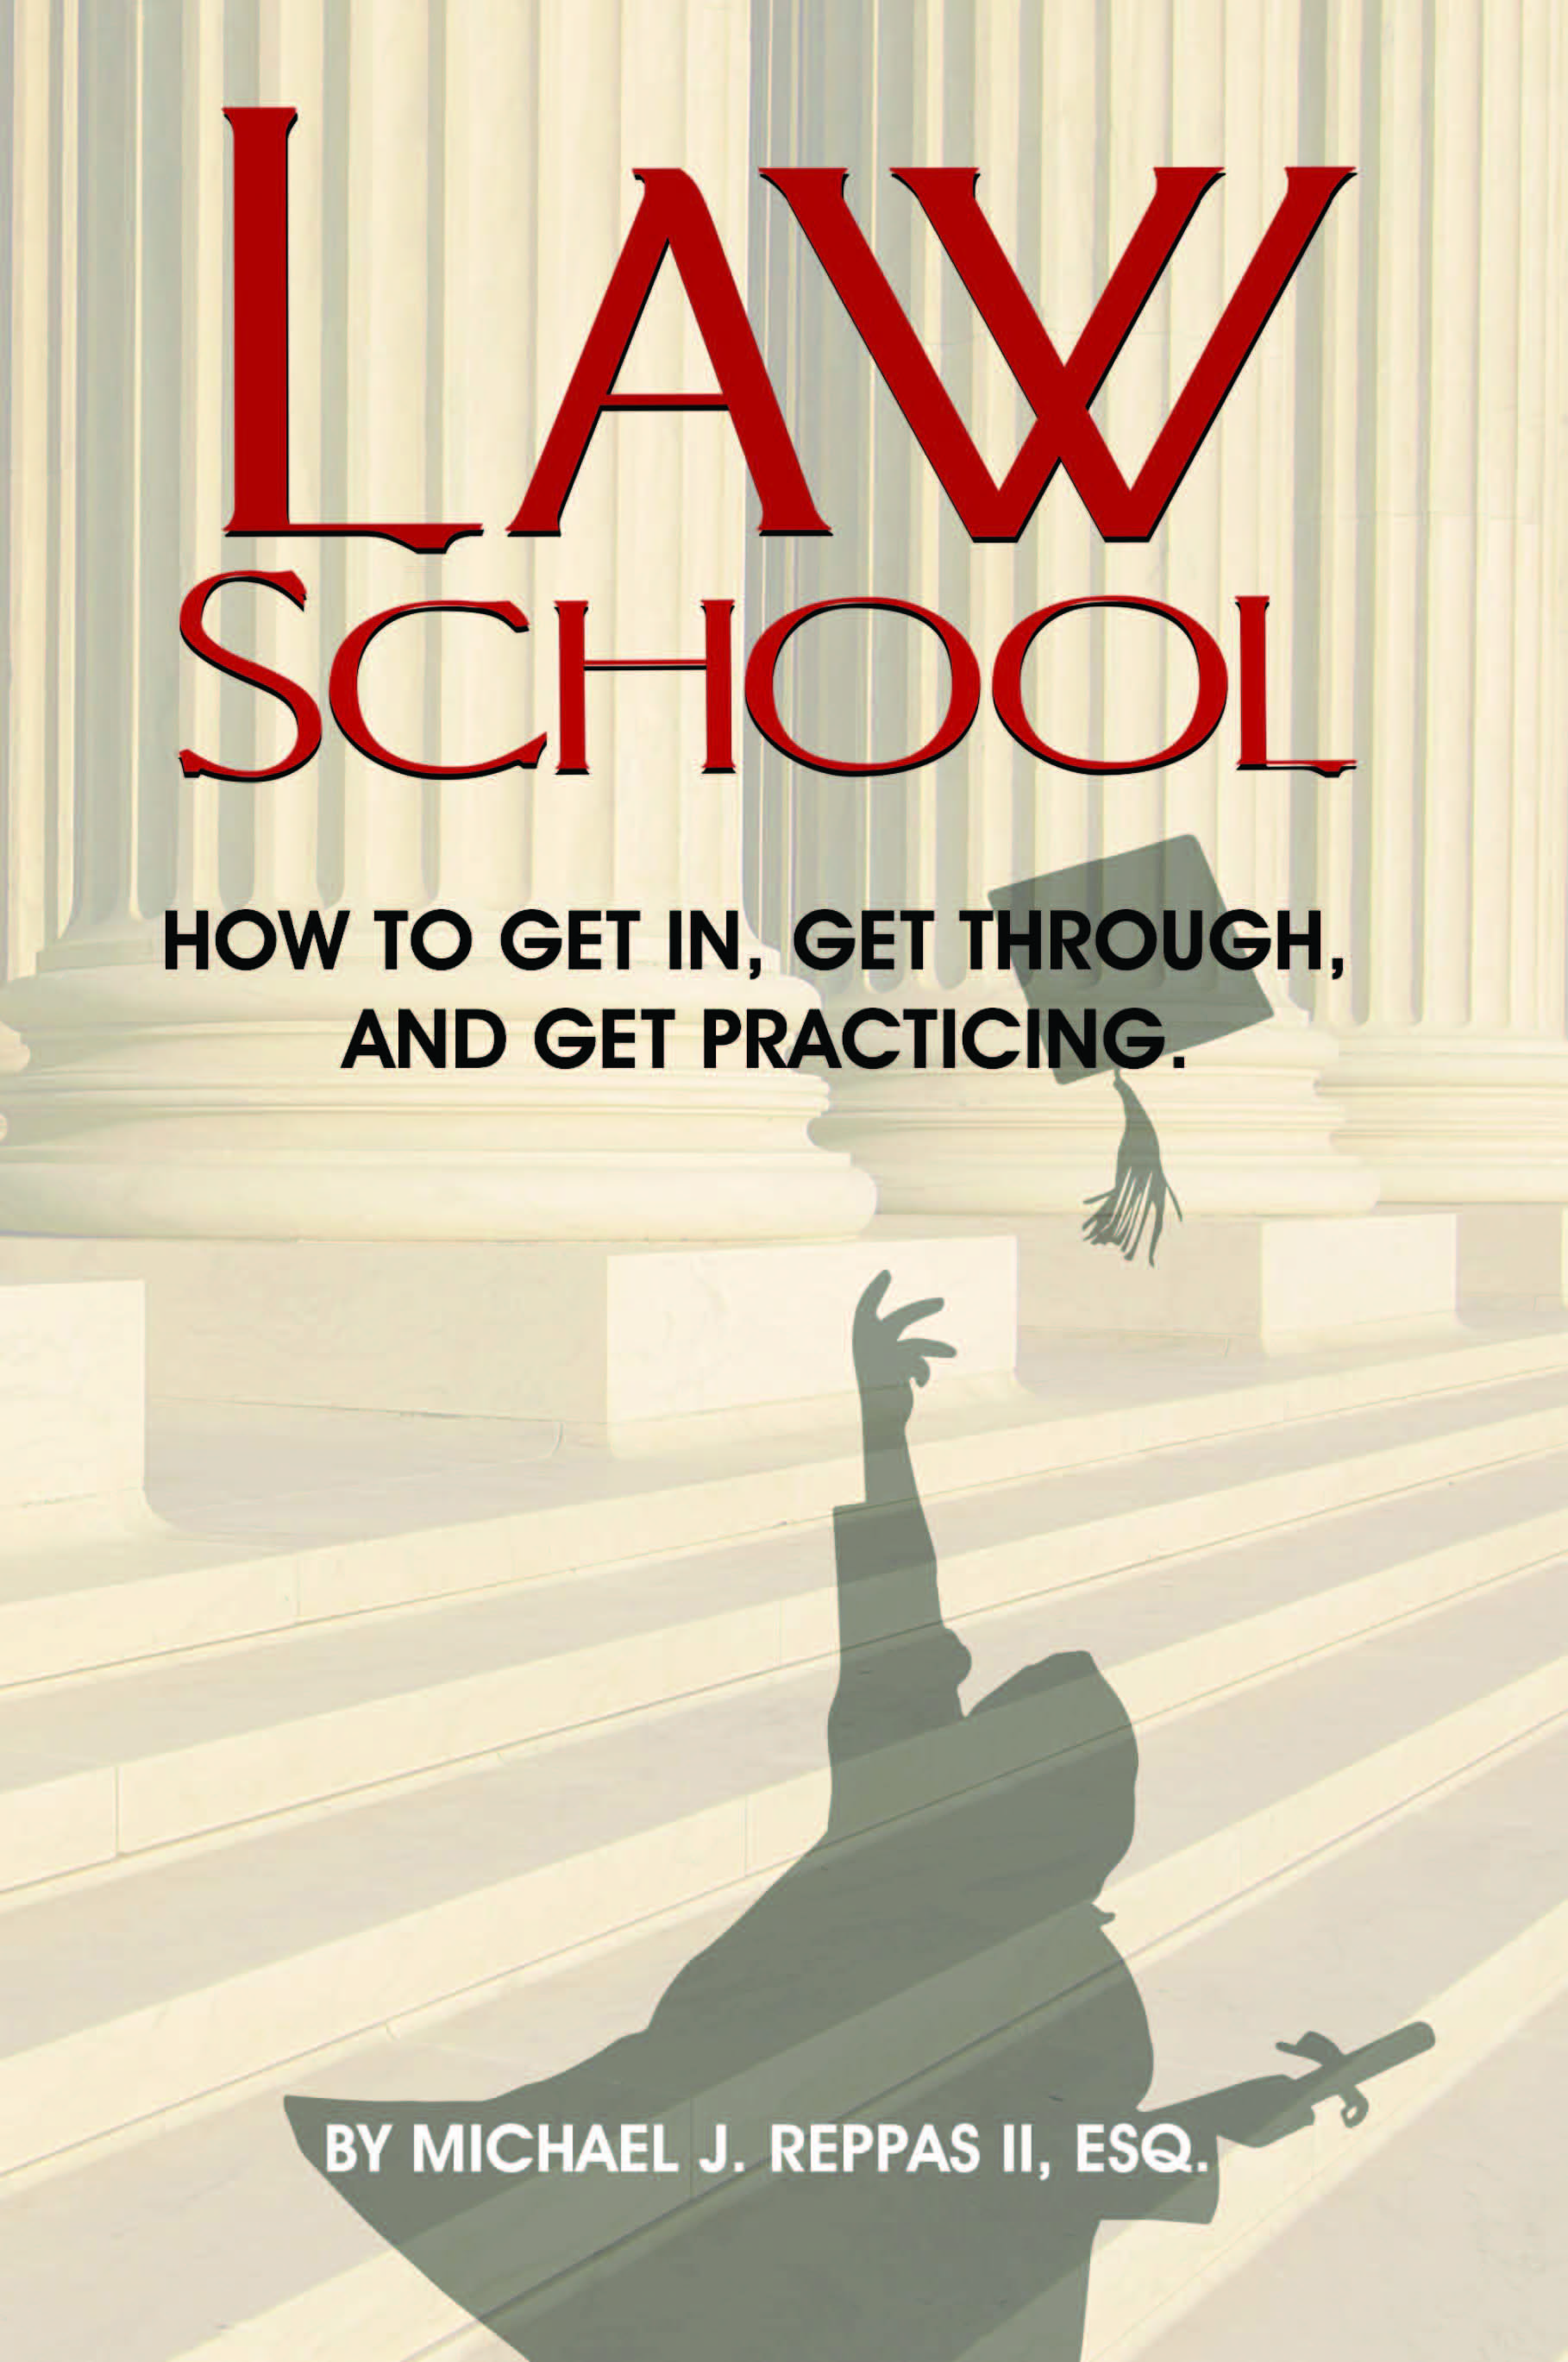 Law School- How to Get In, Get Through, and Get Practicing